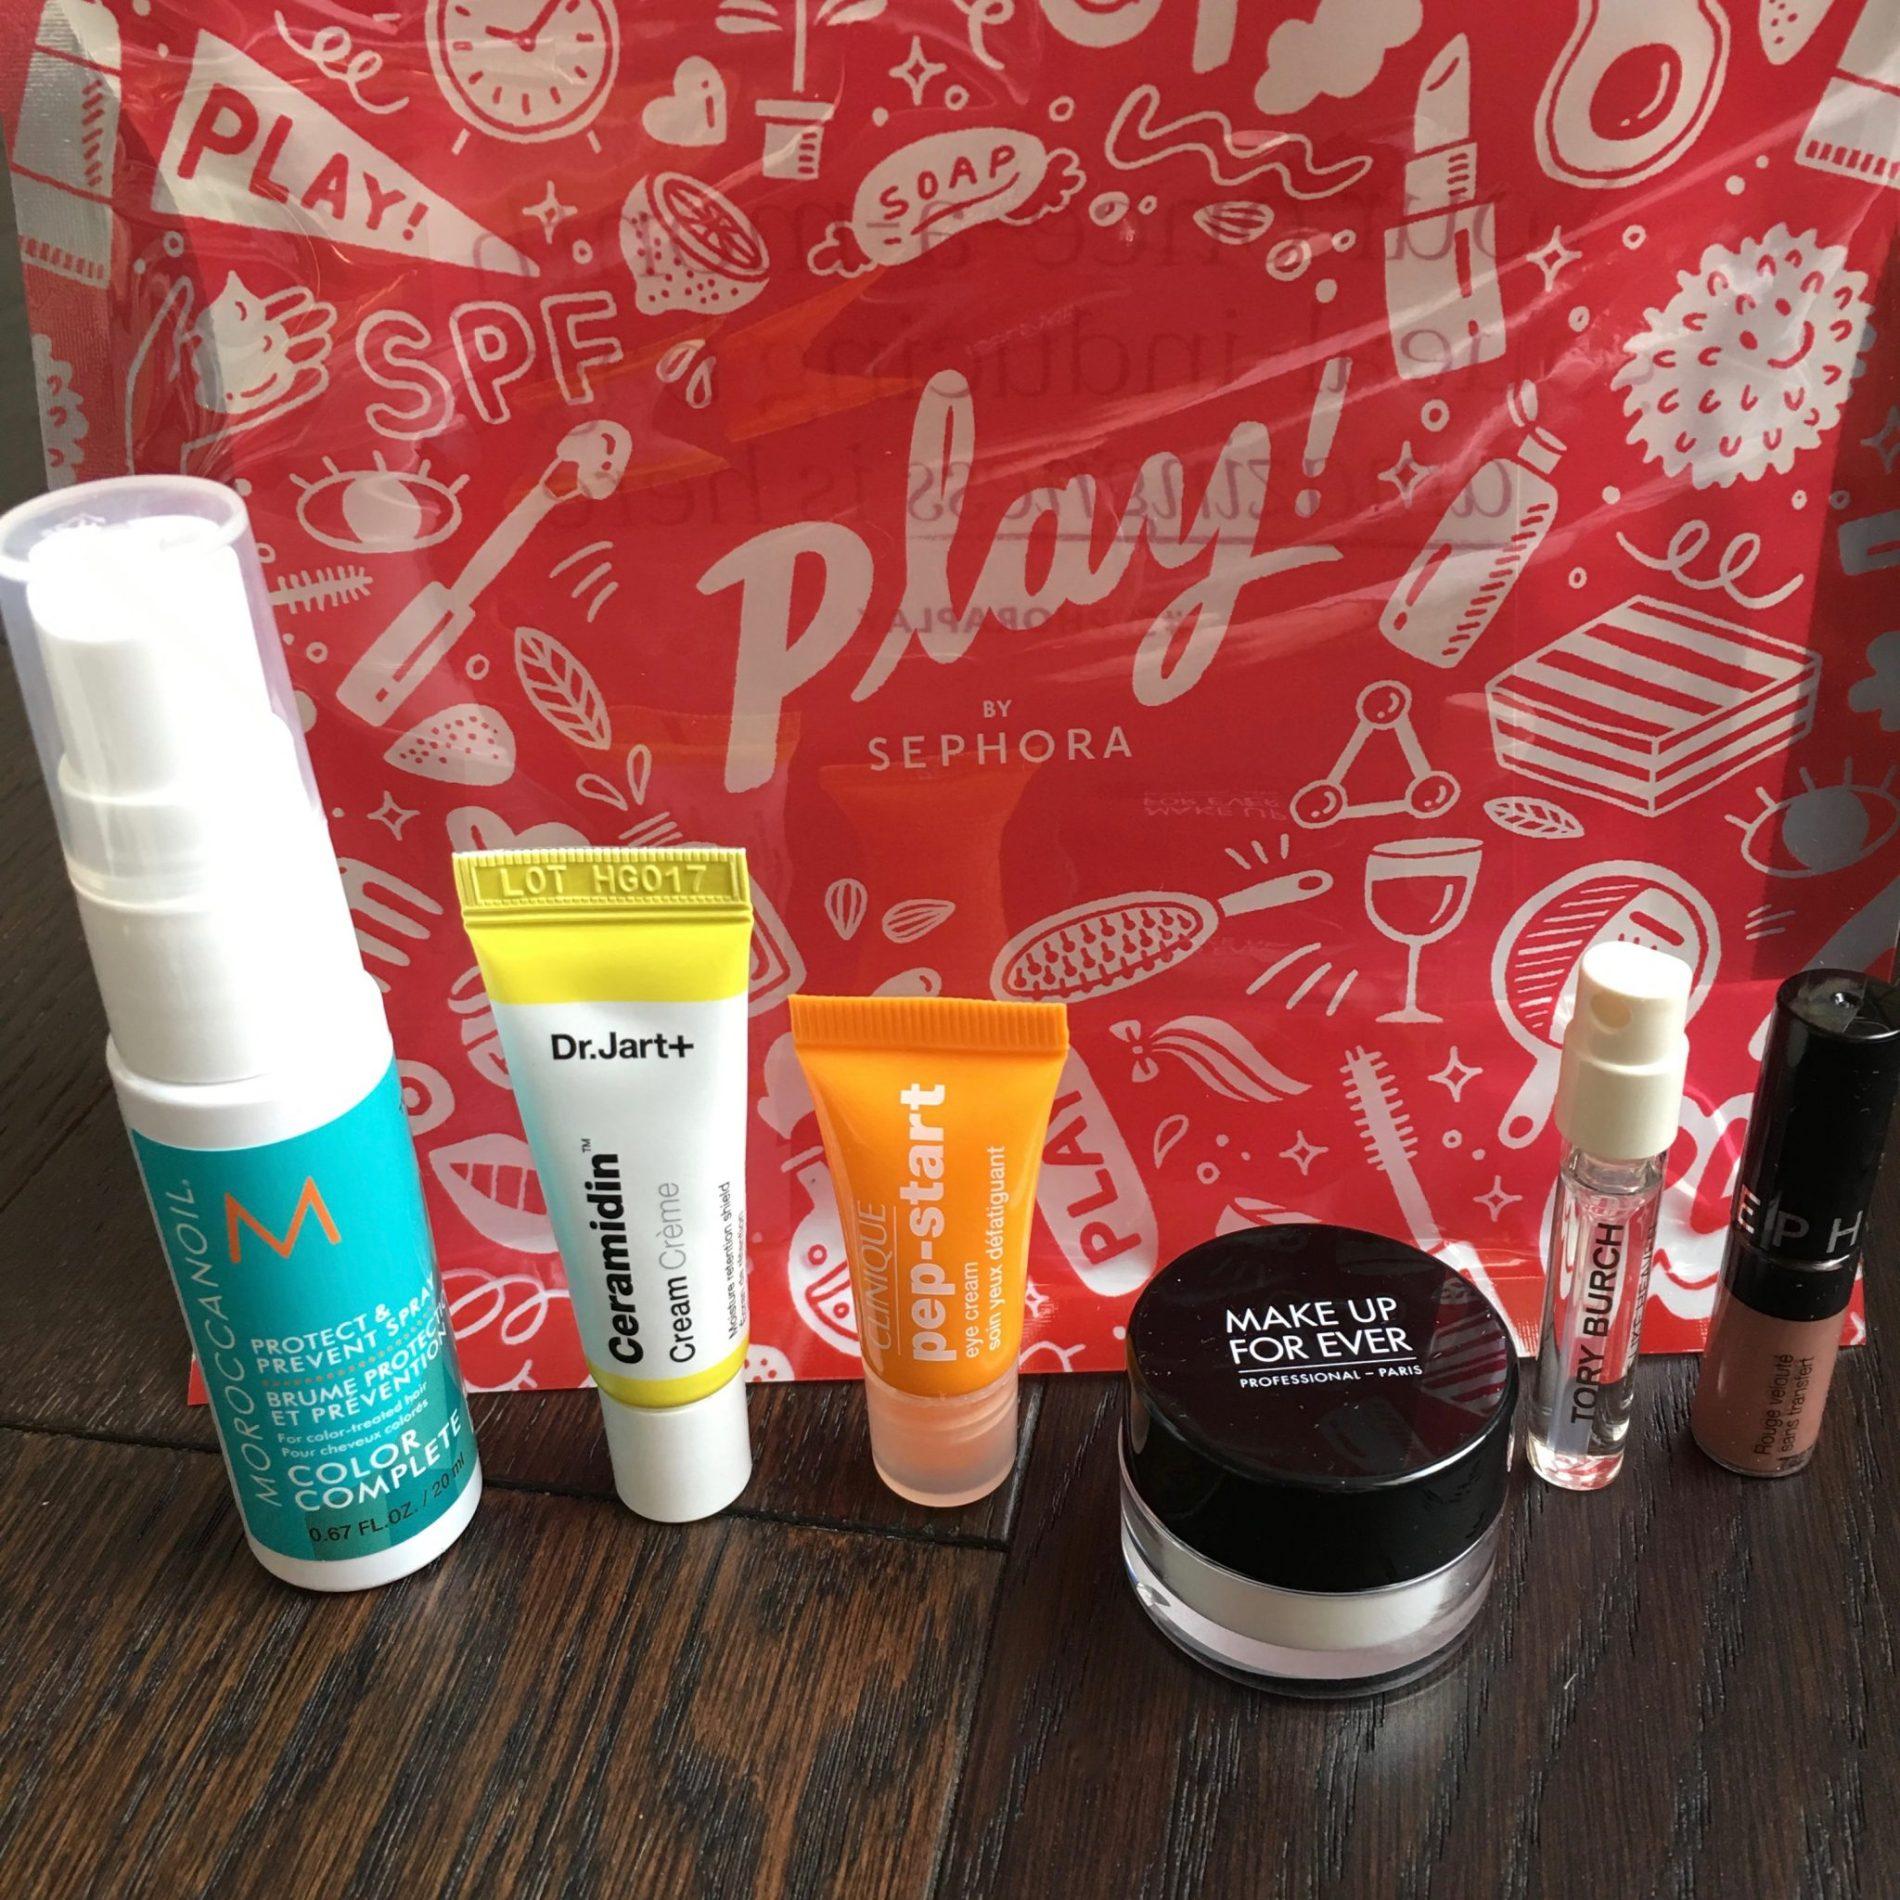 Play! by Sephora Review – November 2018